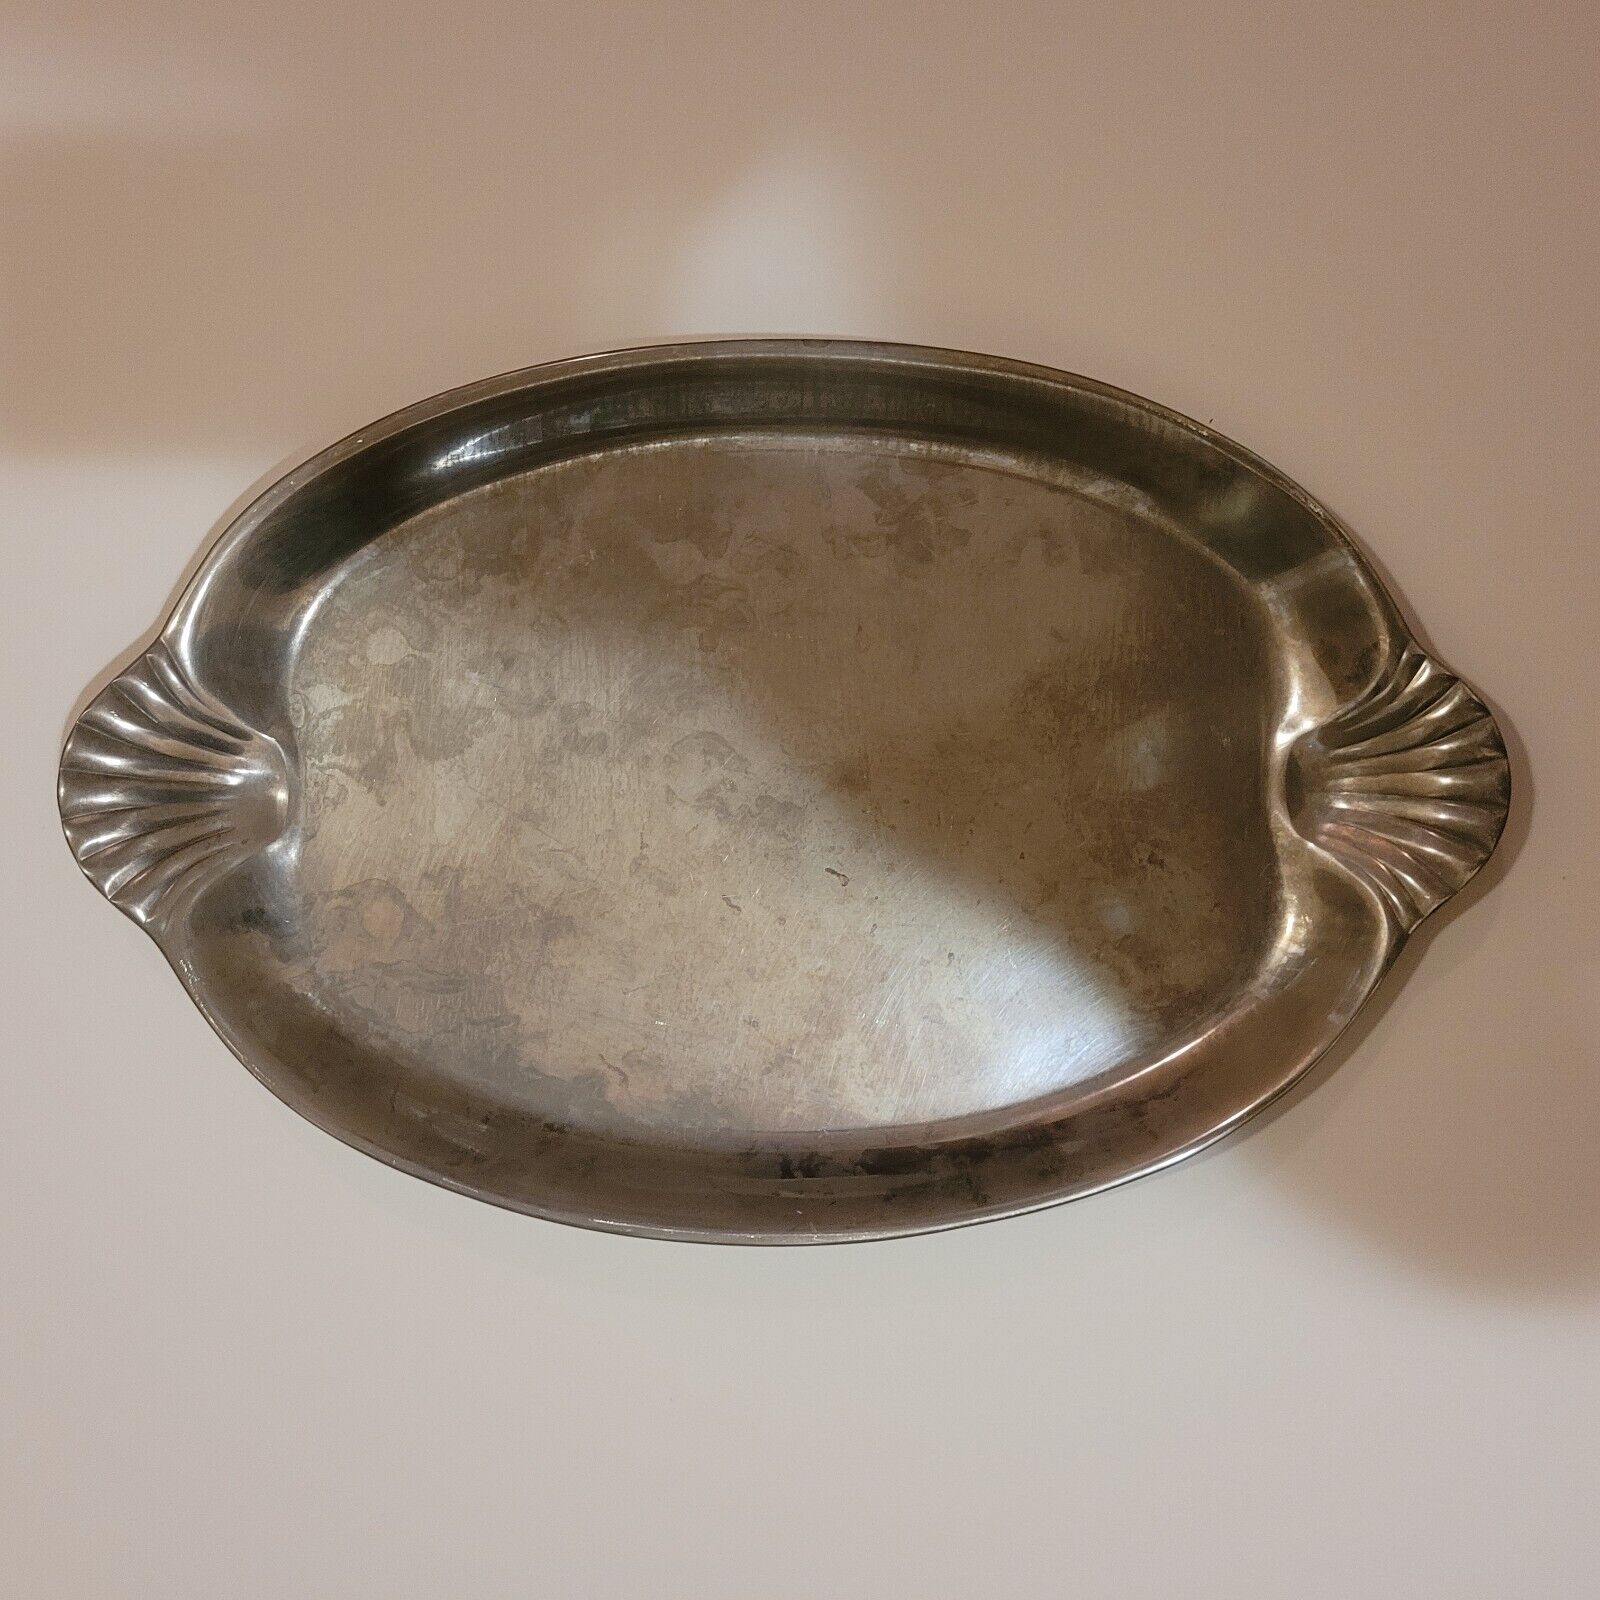 Vintage The Wilton Co. RWP Pewter Serving Platter Oval Scalloped Handle 